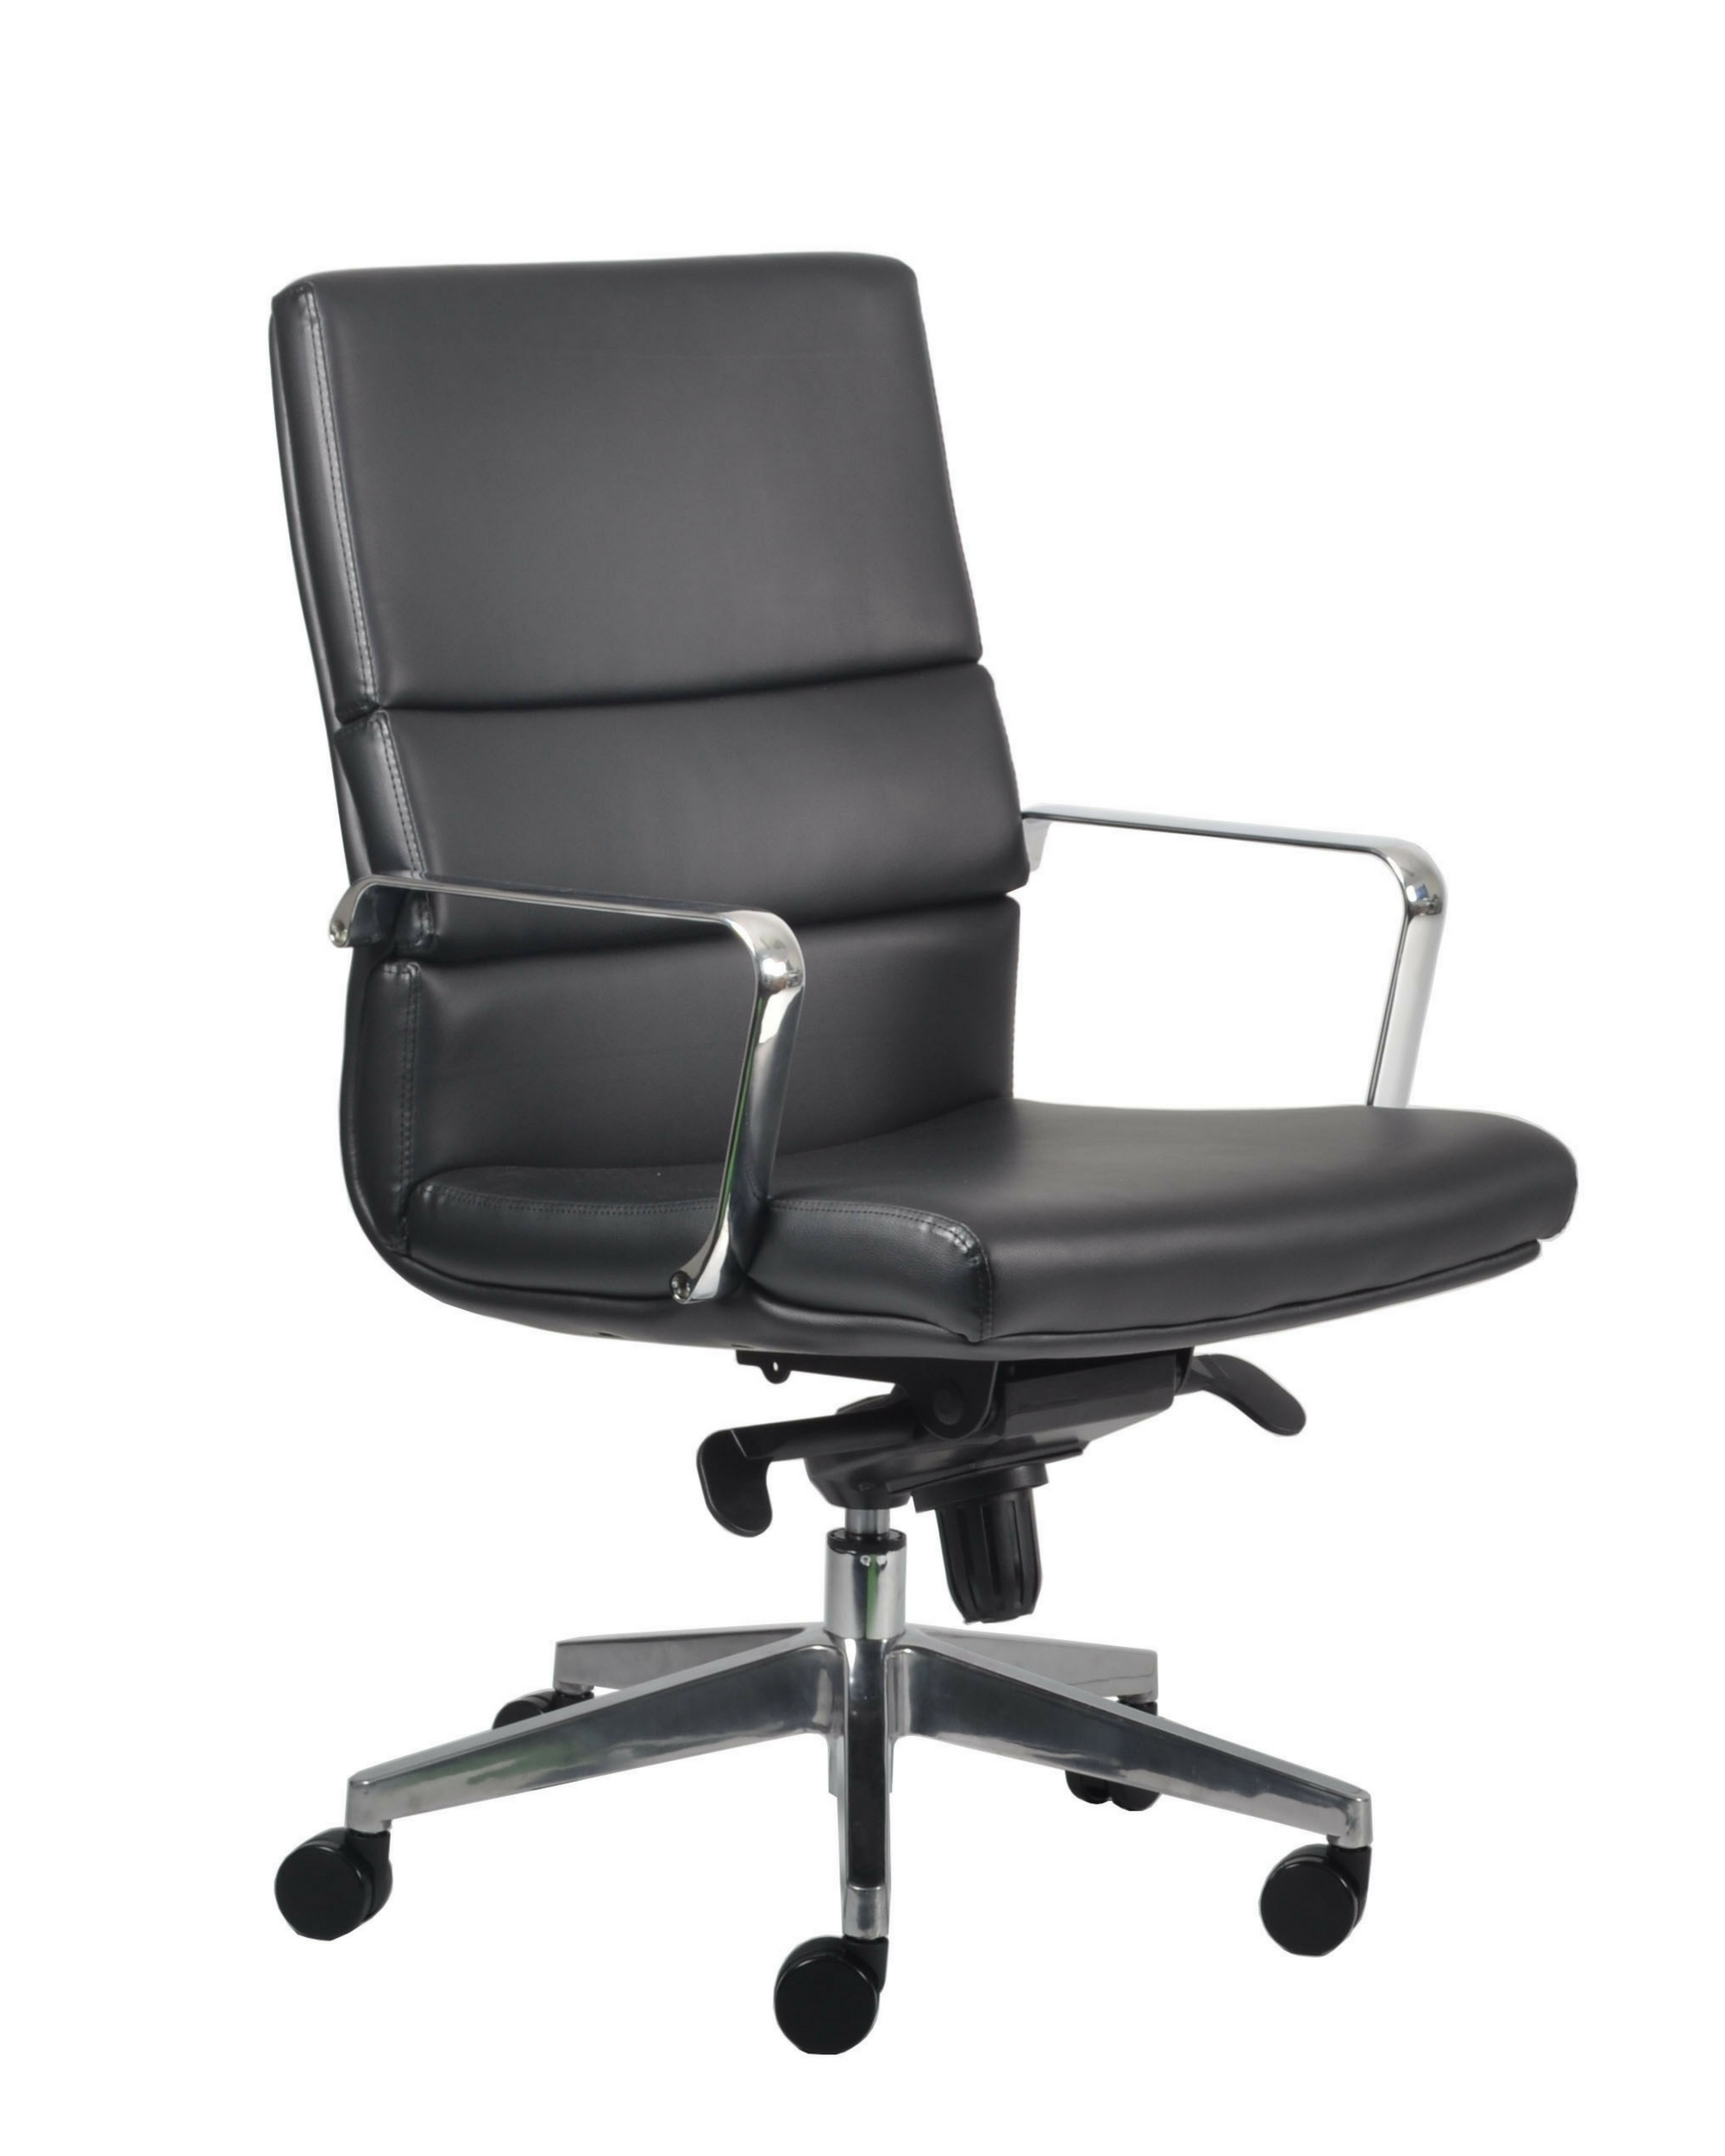 Office_executive_chair_mid_back_arms_DeLuca_Abody_Furniture.png